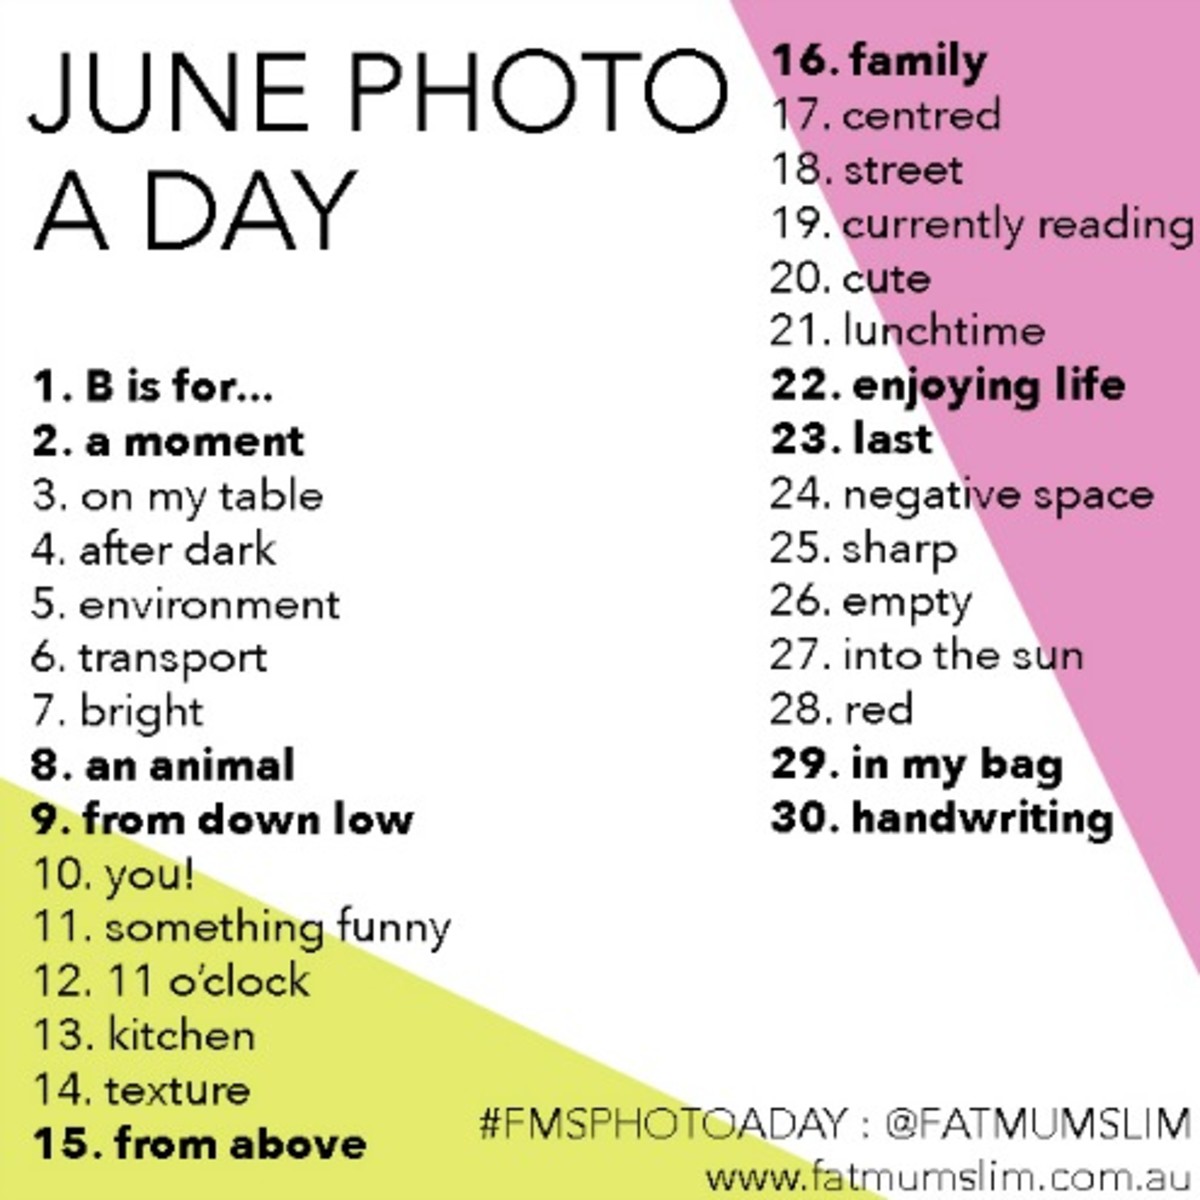 JUNE-PHOTO-A-DAY